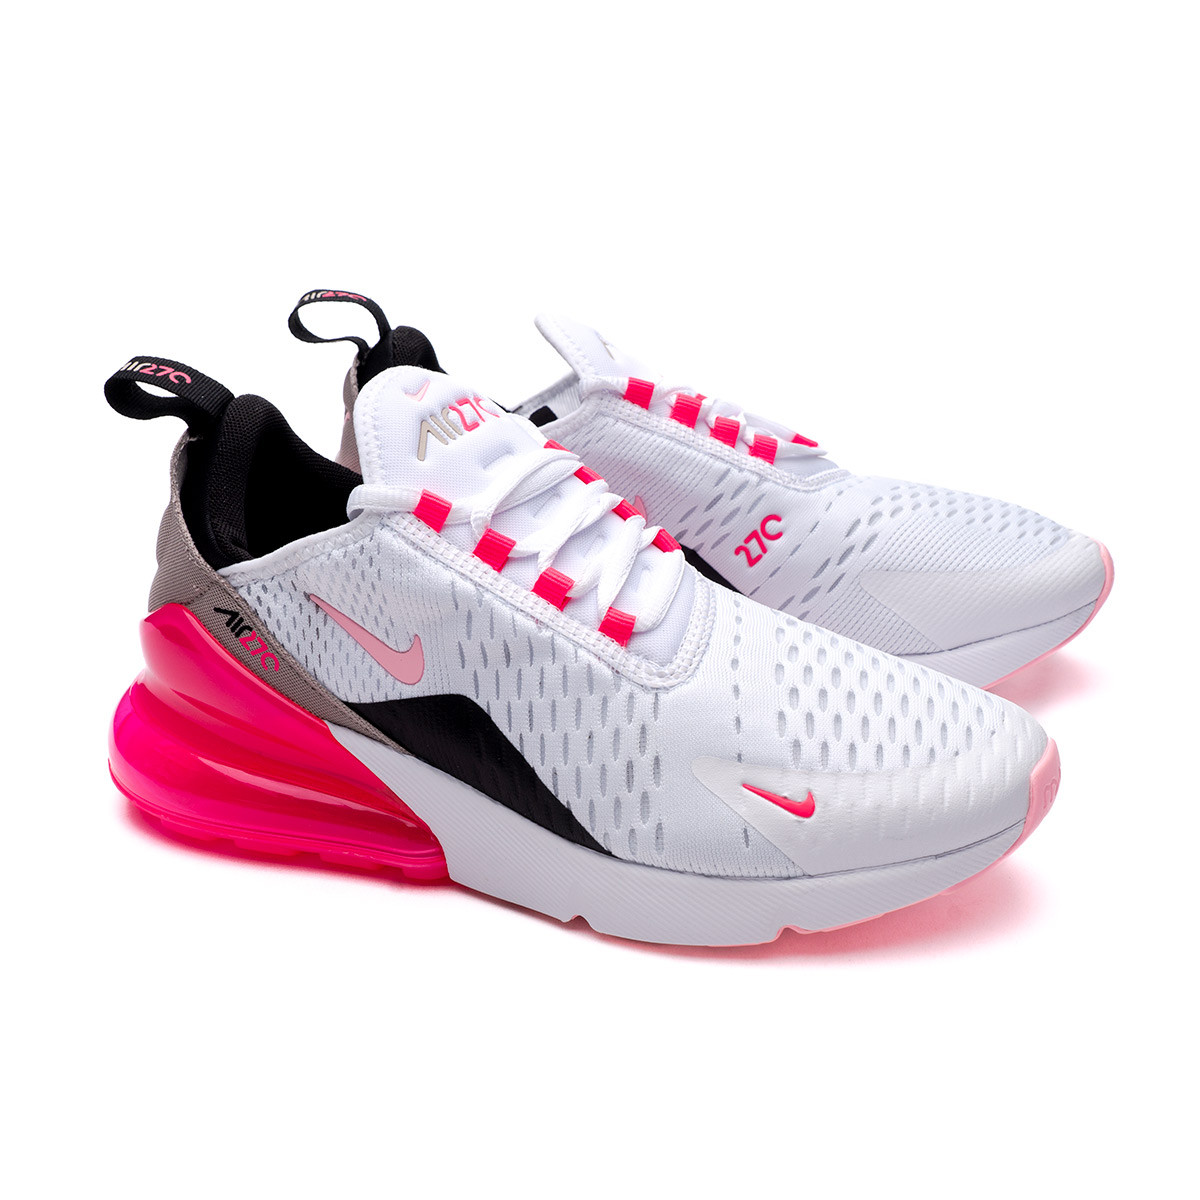 Zapatilla Max 270 Mujer White-Arctic Punch-Hyper Pink-Black - Fútbol